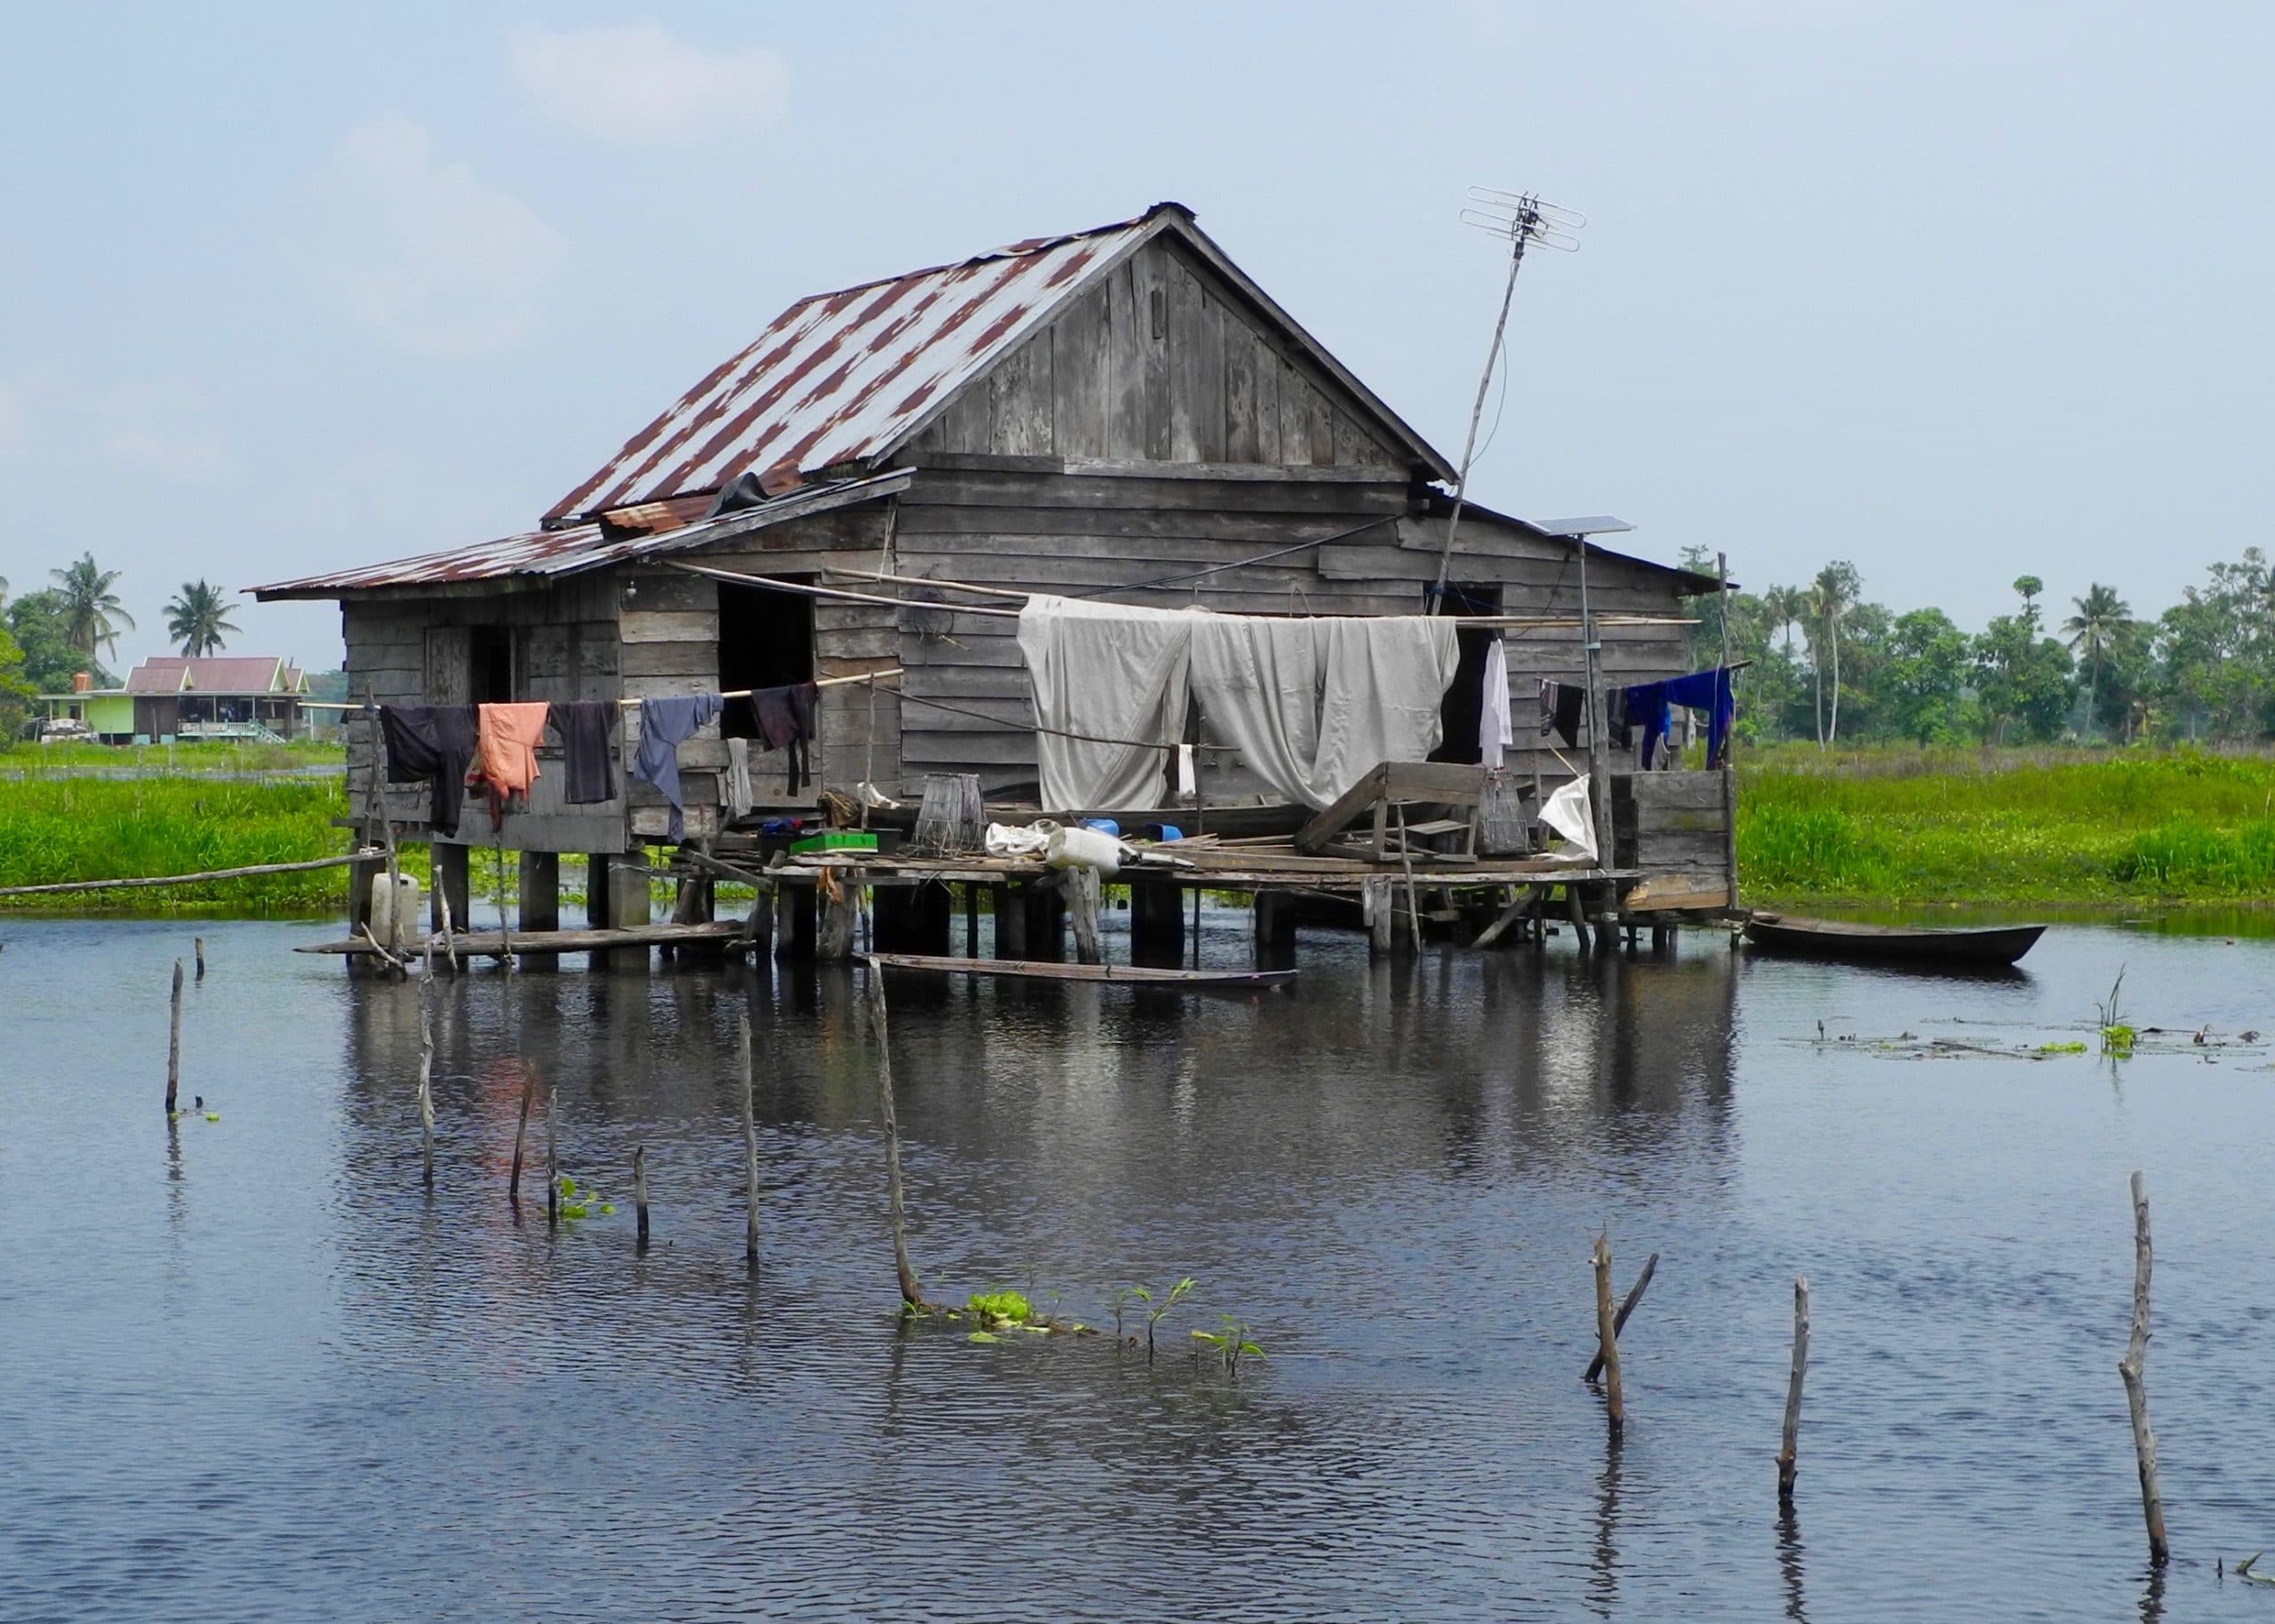 In the Peatlands of South Sumatra: A Tale of Two Villages